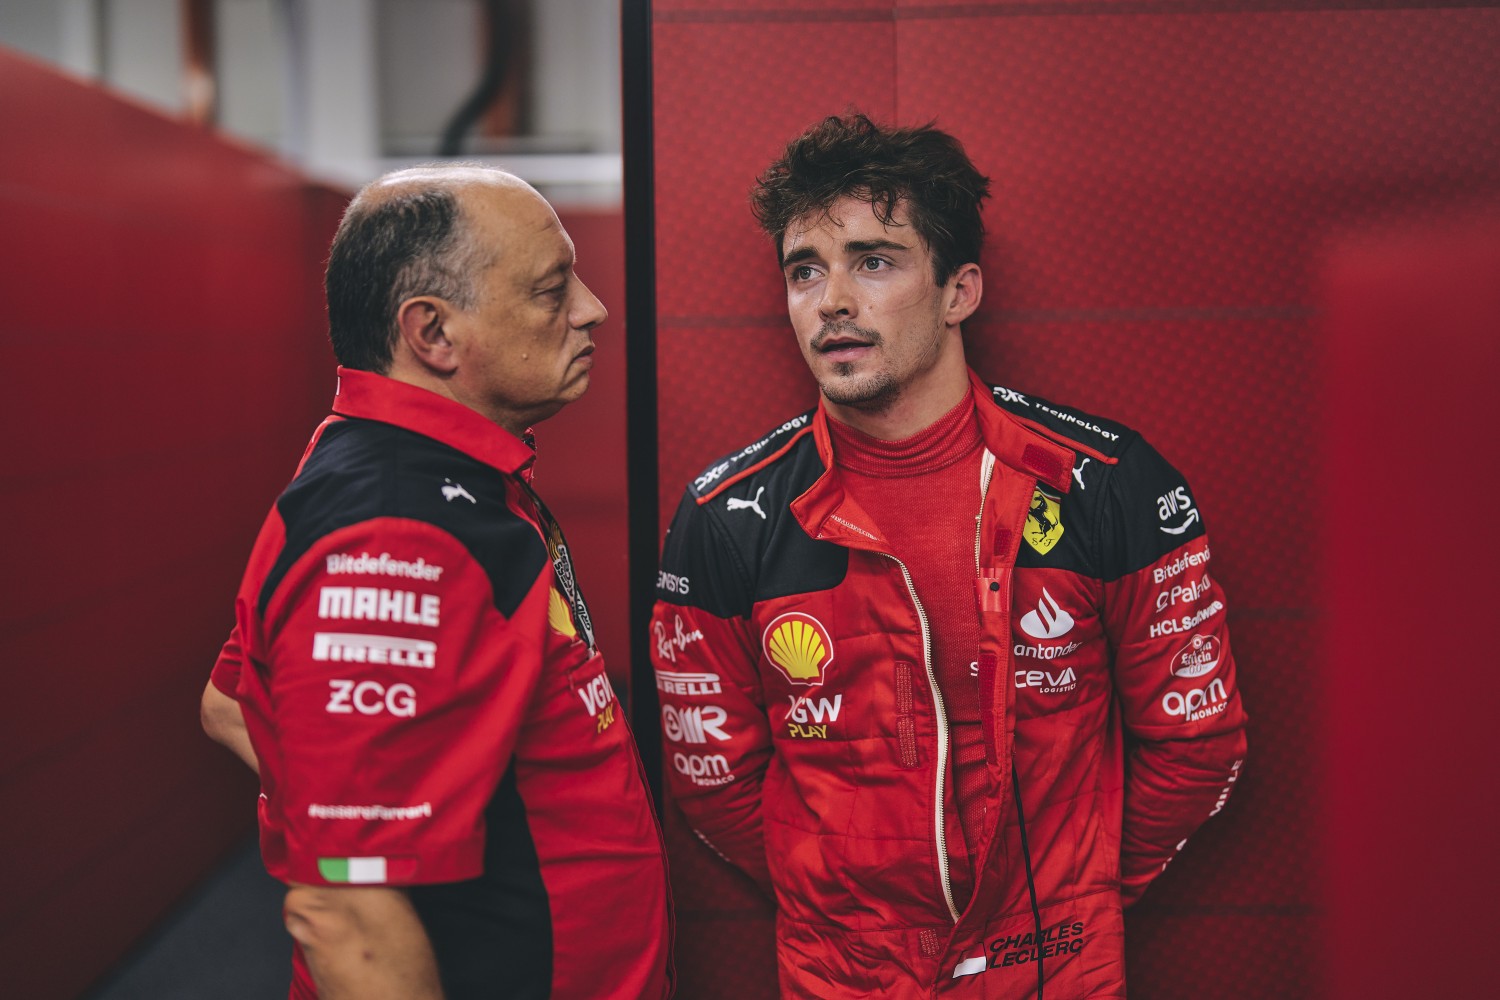 Frederic Vasseur tries to cheer up a defeated Charles Leclerc credit @Scuderia Ferrari Press Office